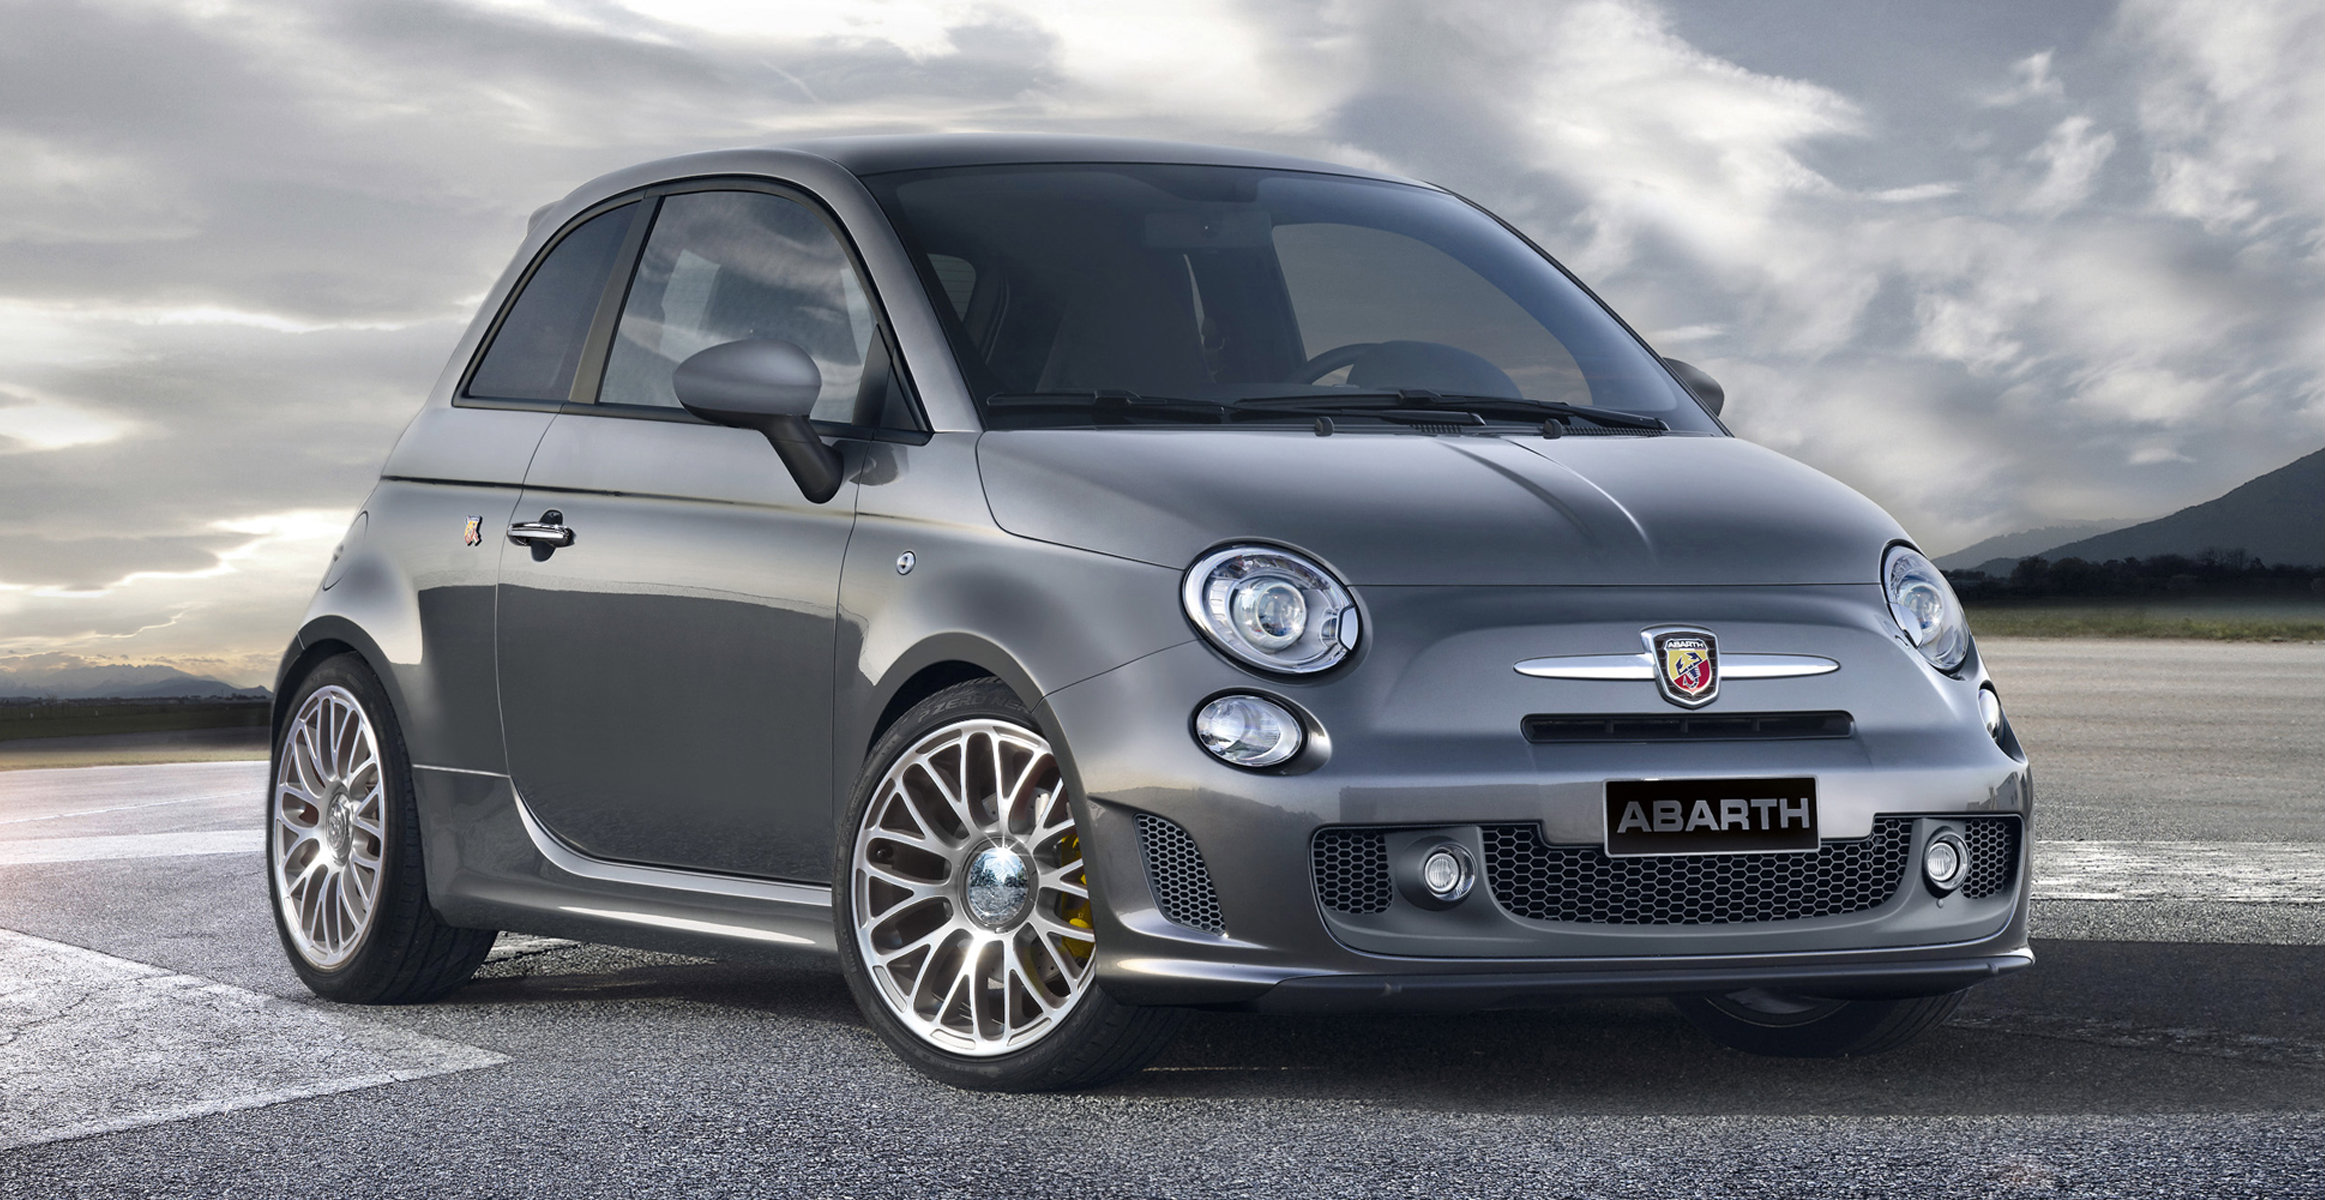 abarth-500-track-experience-package-is-a-uk-only-deal-worth-14990-86100_1